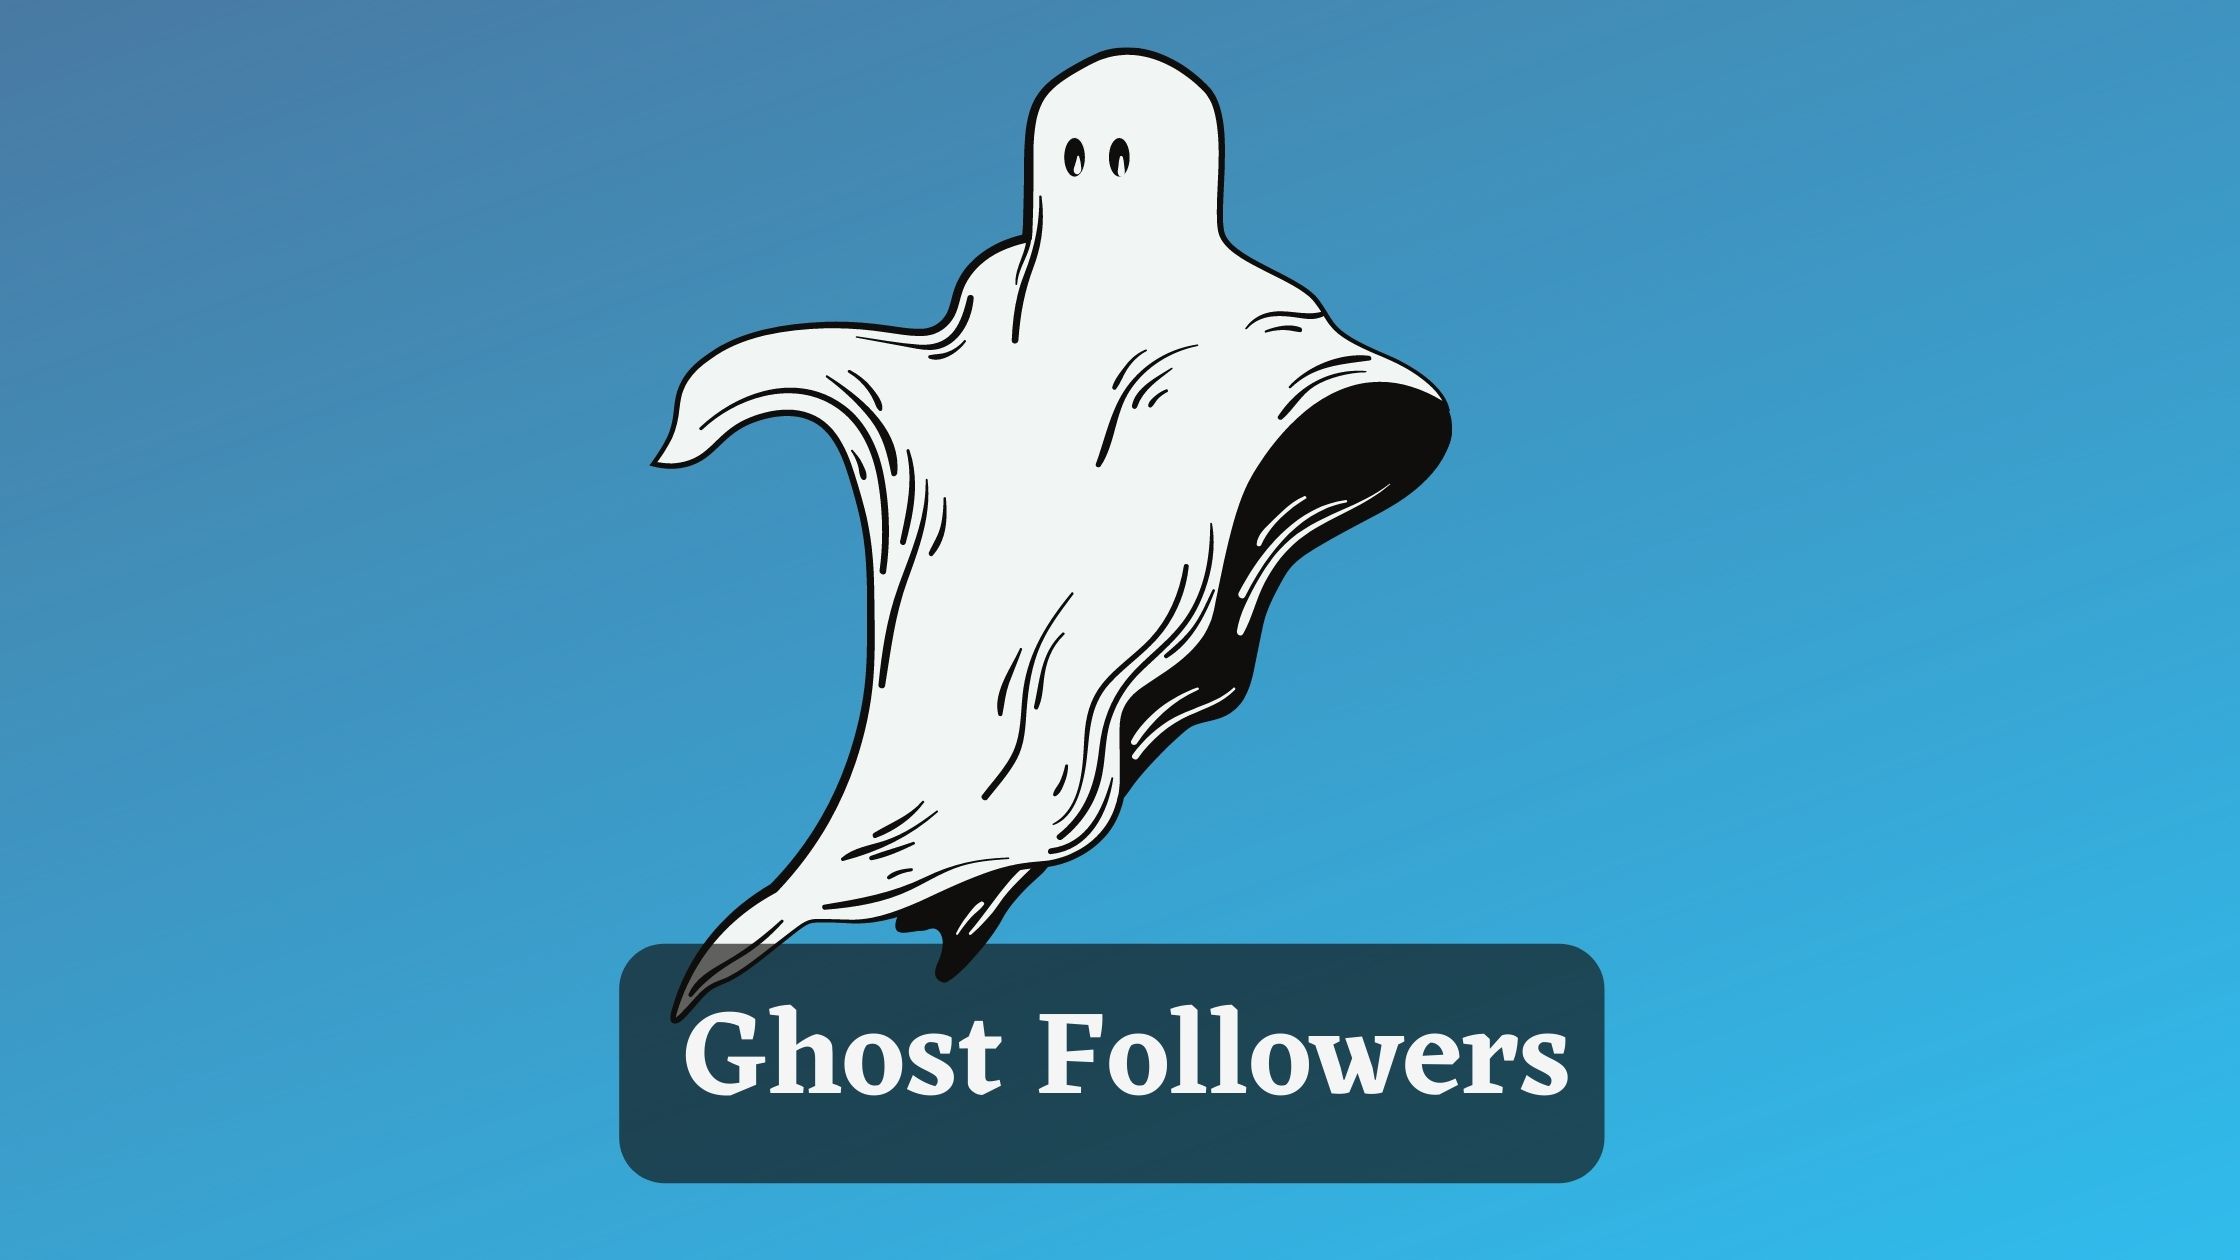 How to Identify Ghost Followers